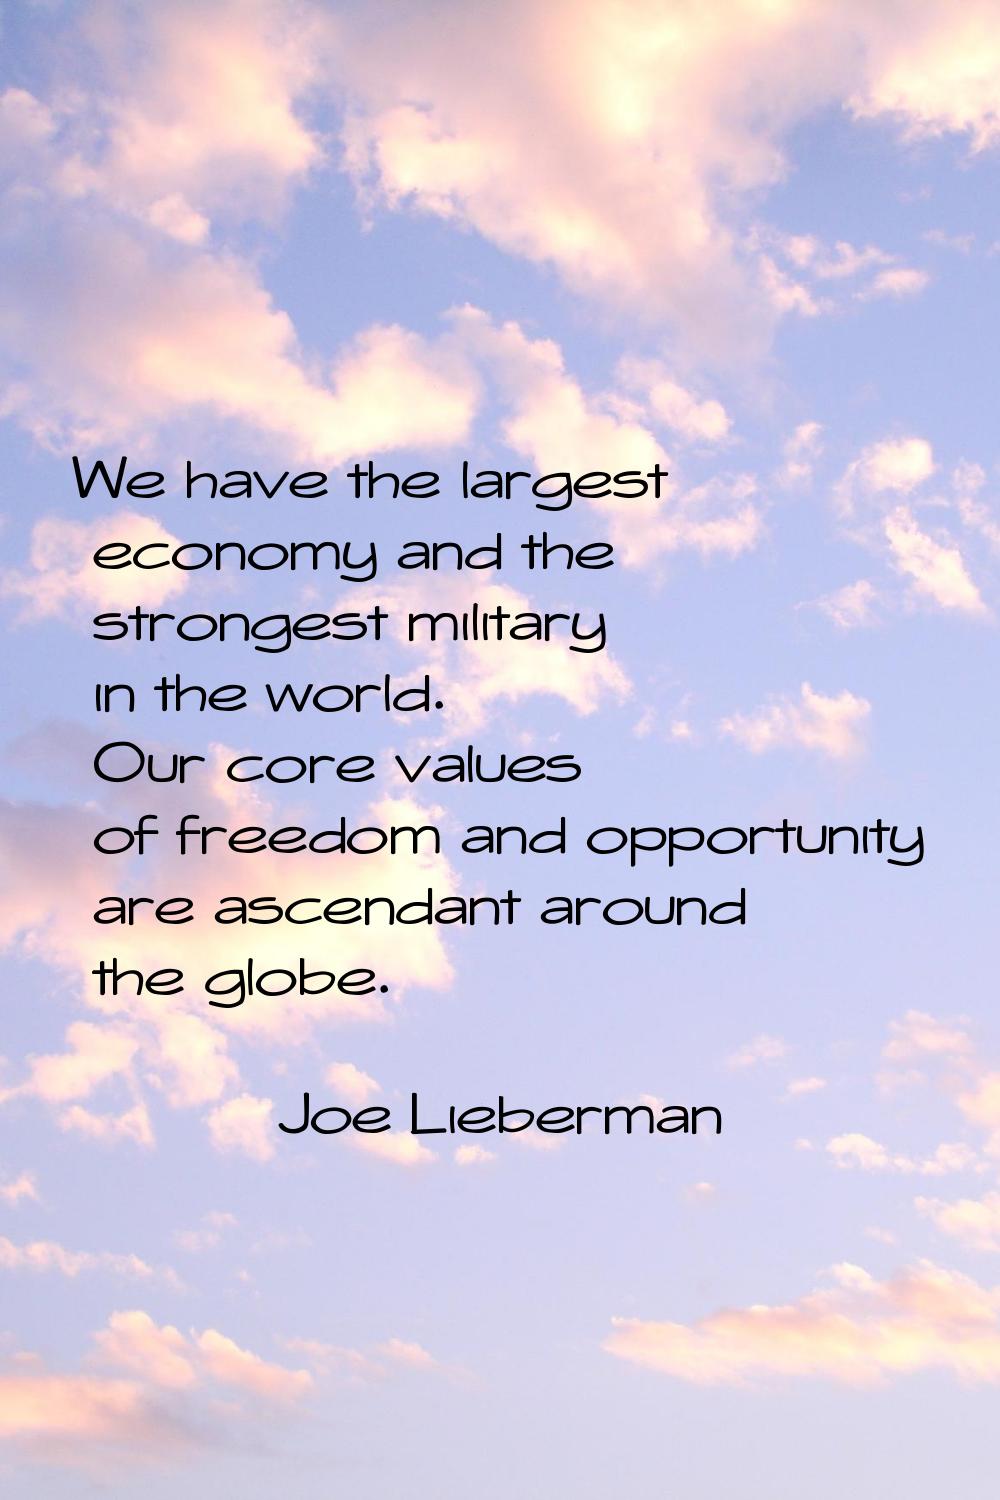 We have the largest economy and the strongest military in the world. Our core values of freedom and